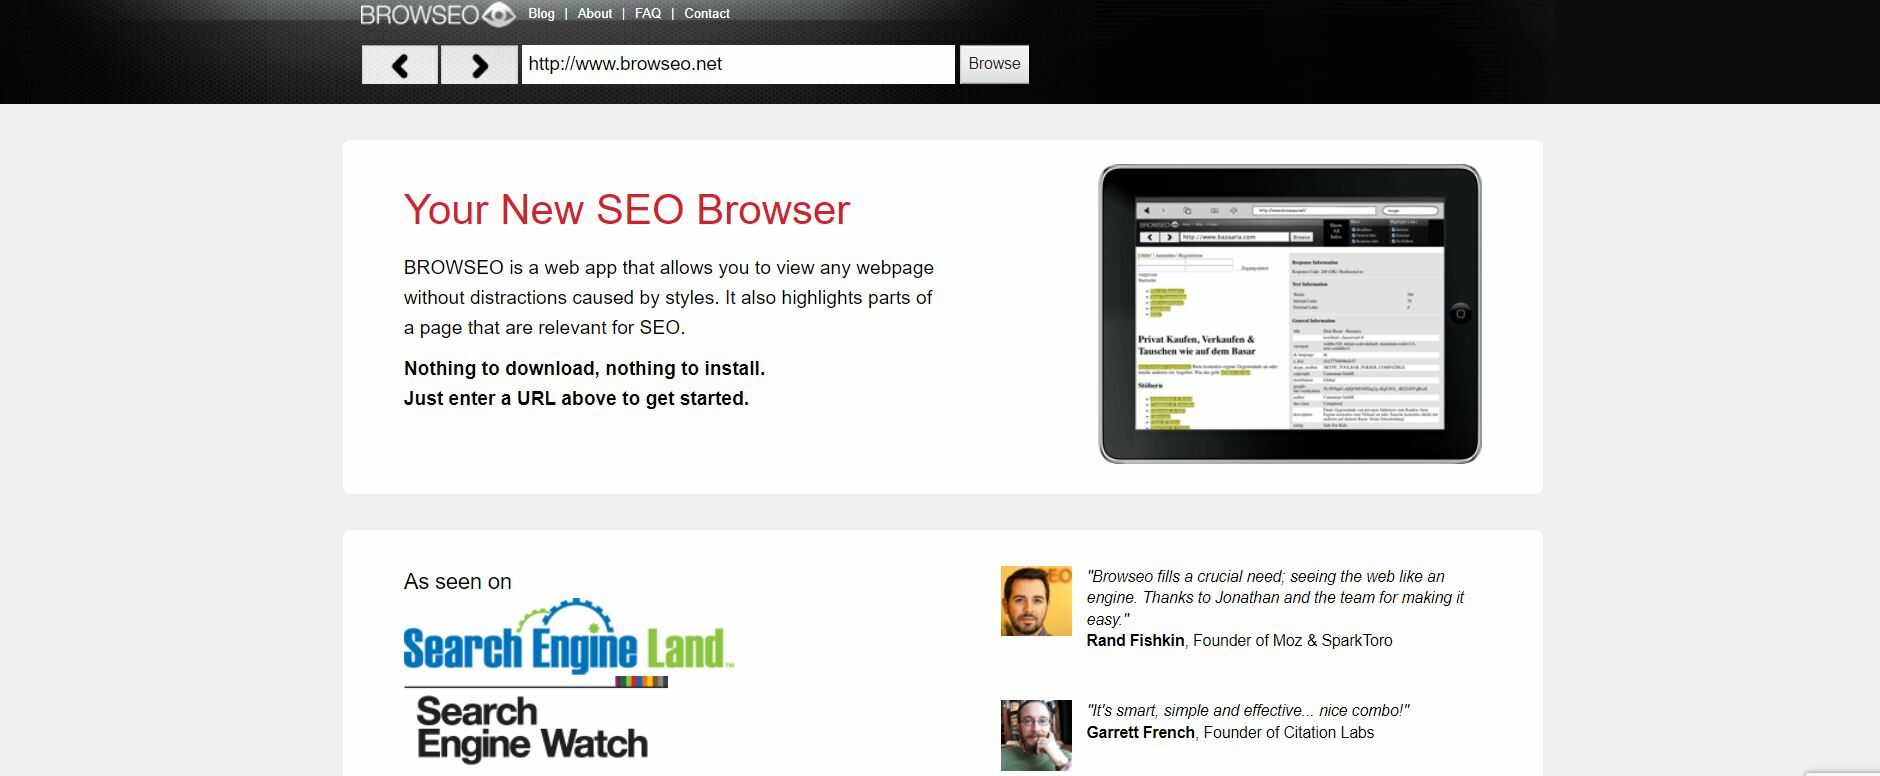 BROWSEO.